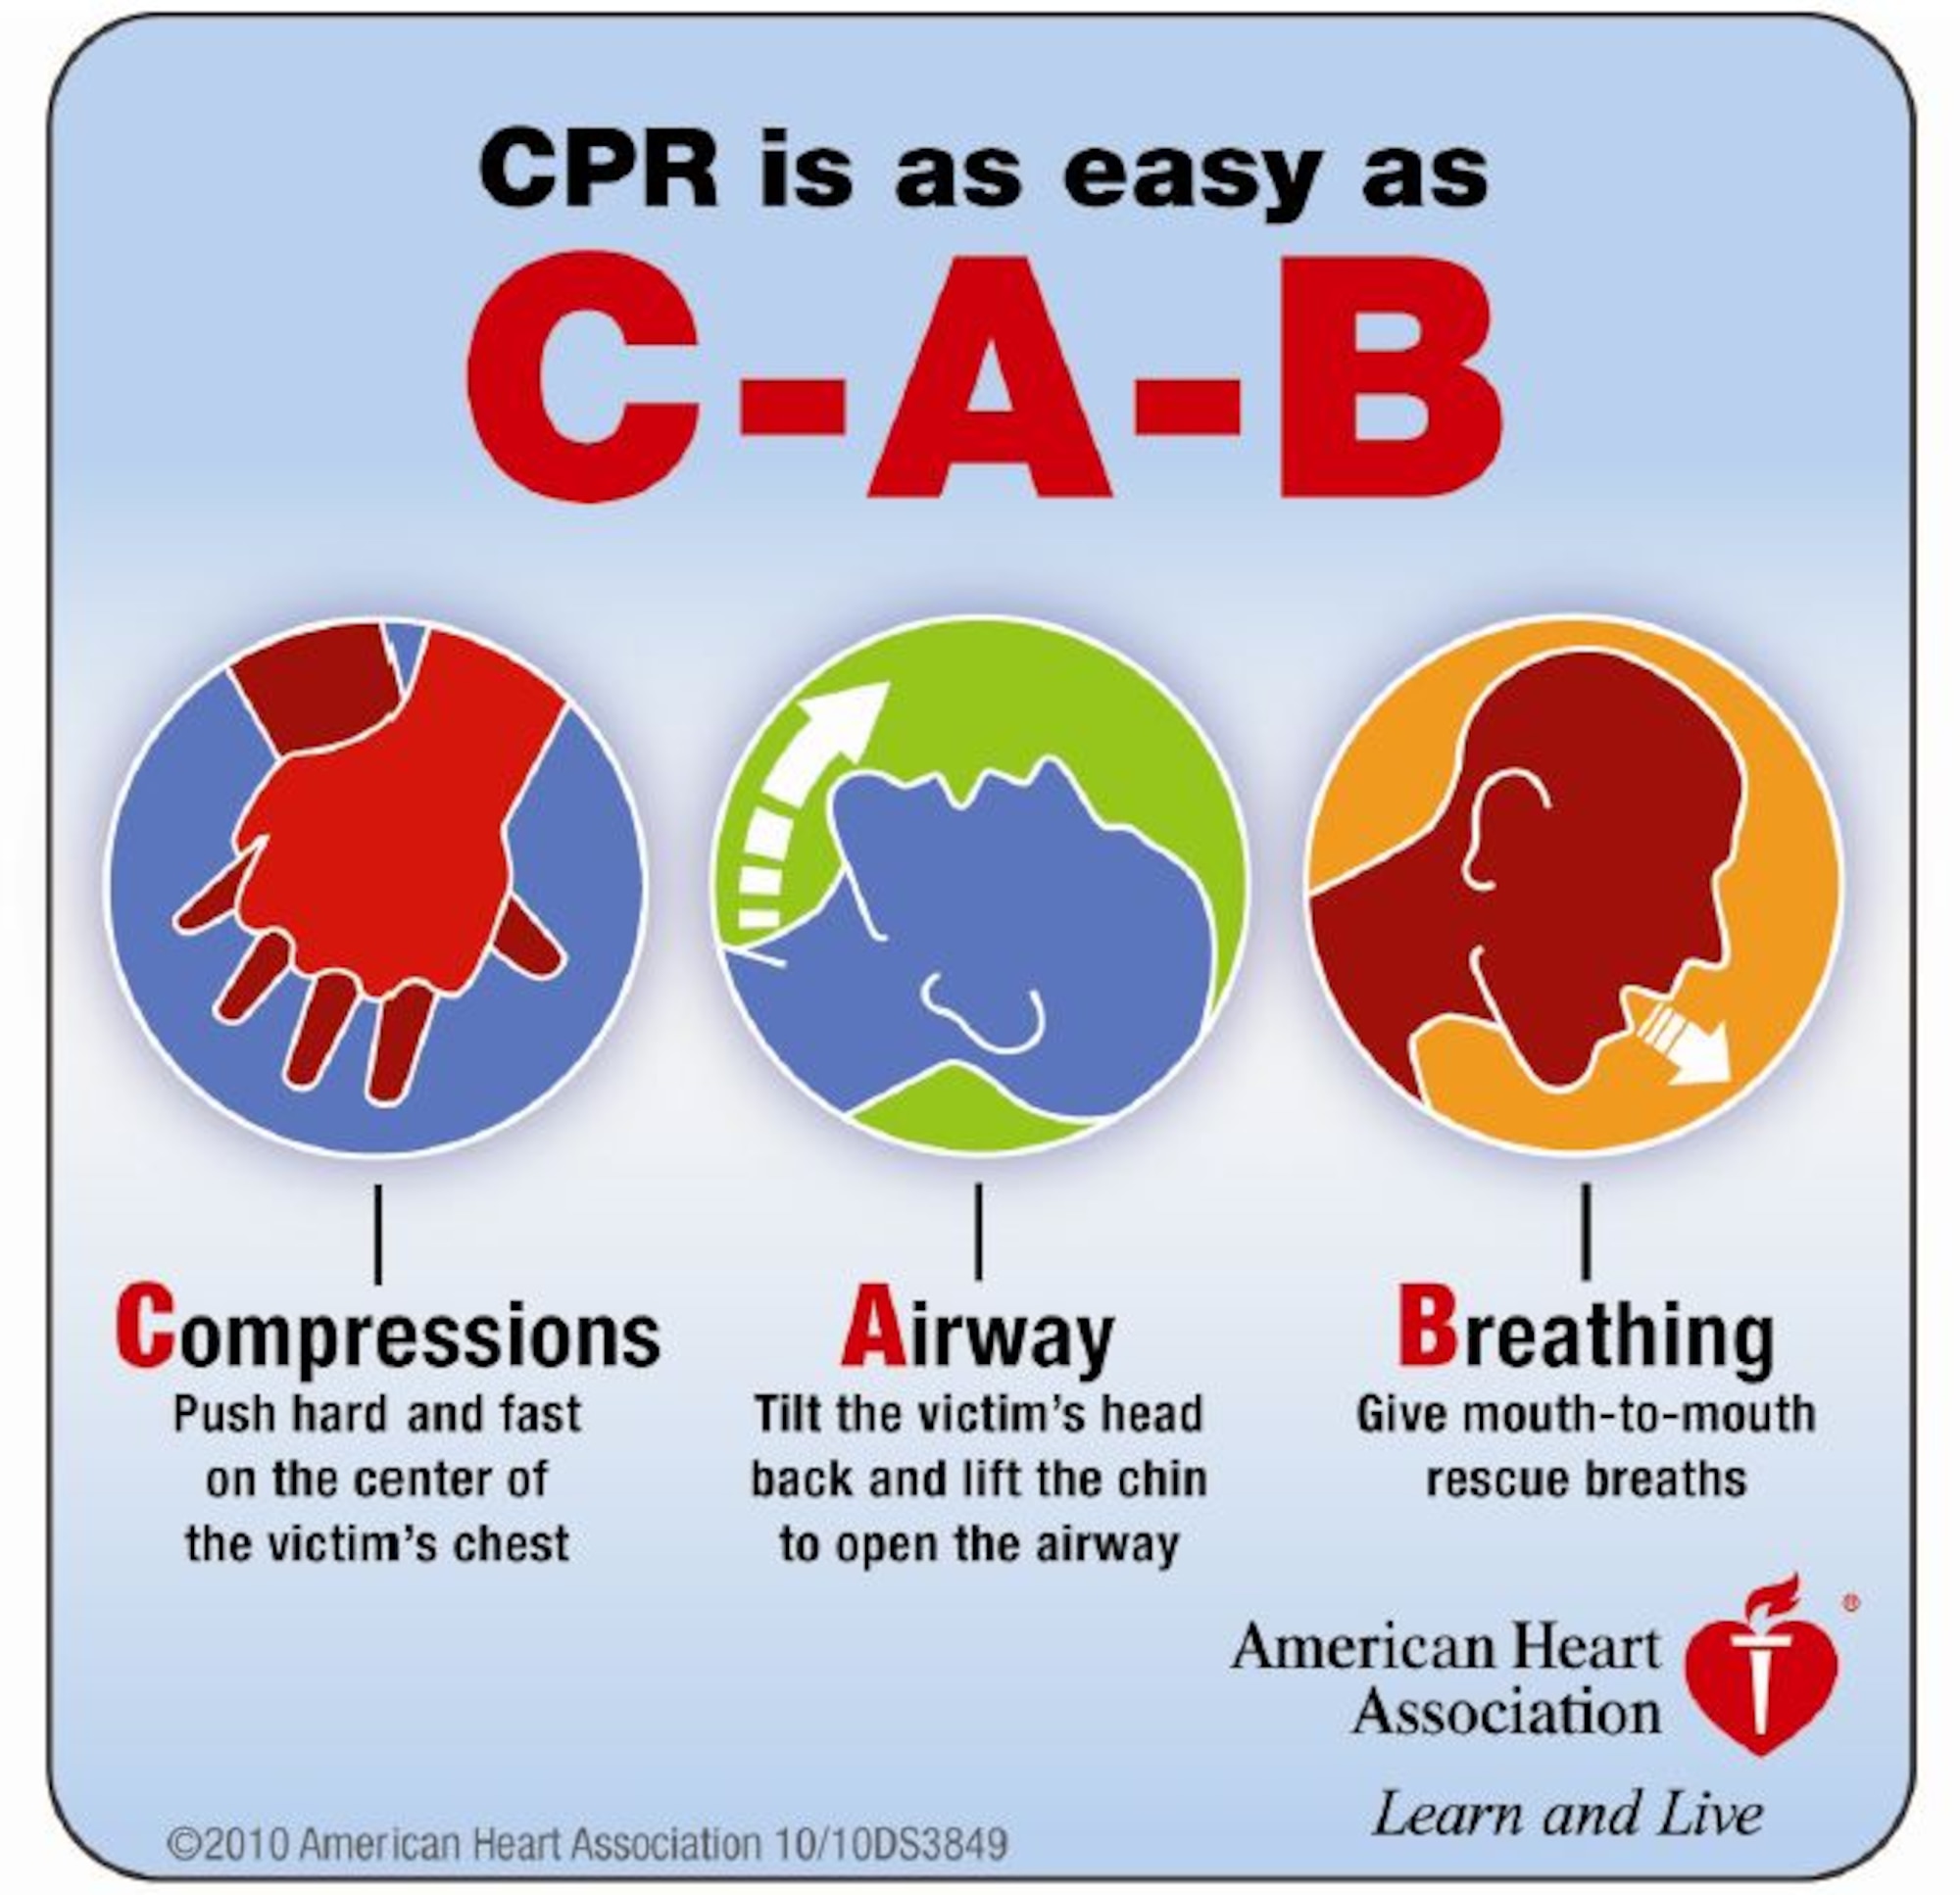 New guidelines change CPR procedures > Barksdale Air Force Base > News